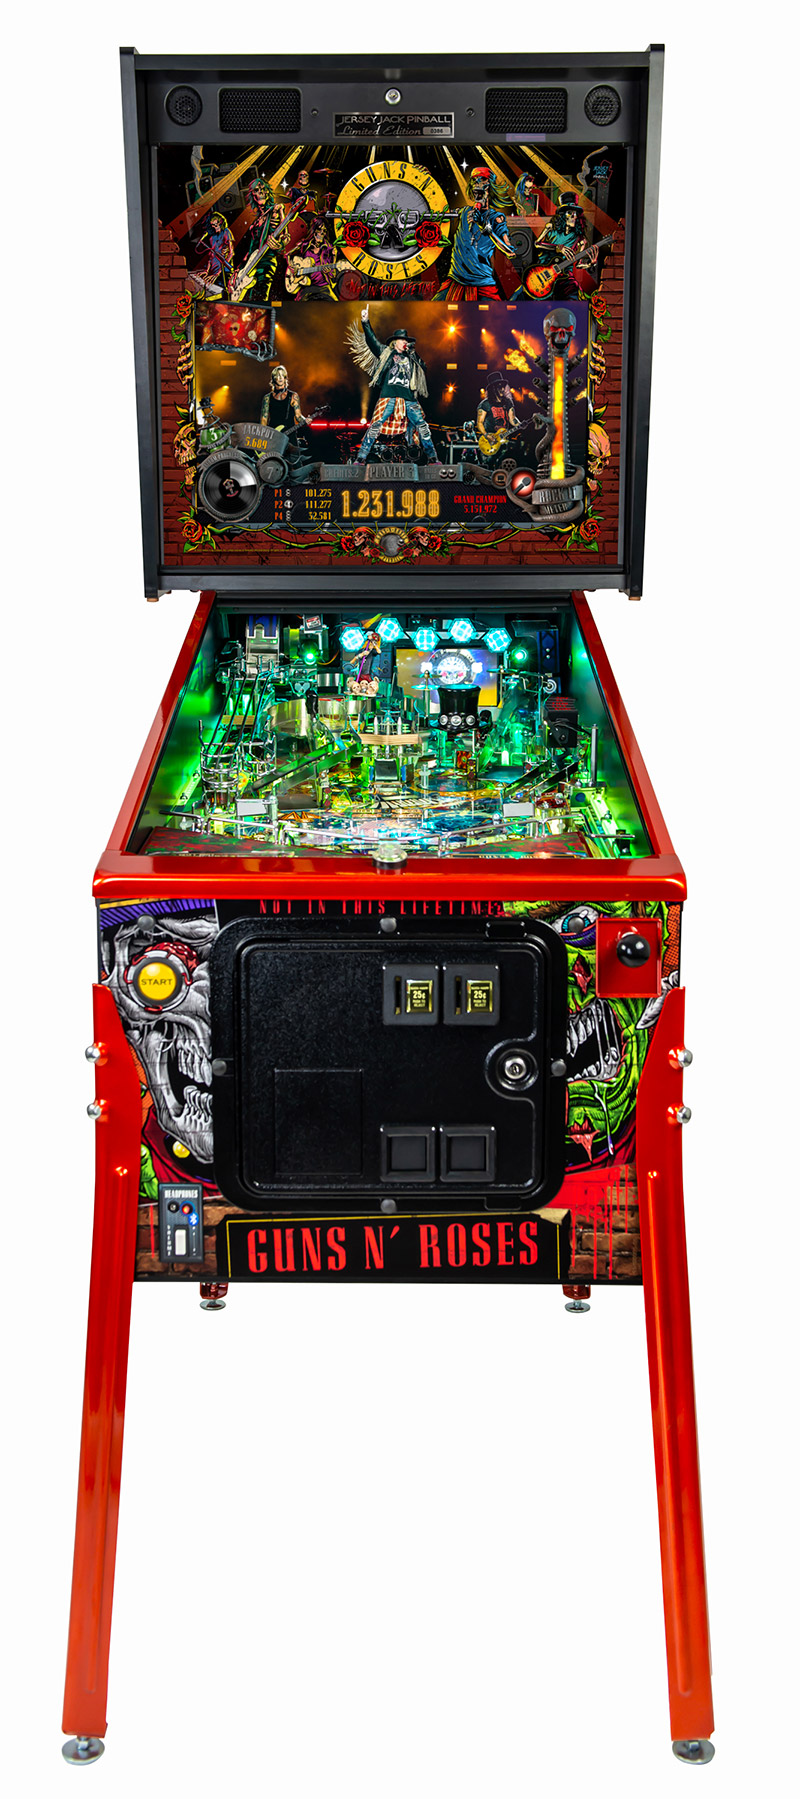 JJP'S N' ROSES REVEALED Welcome to Pinball News – First Free